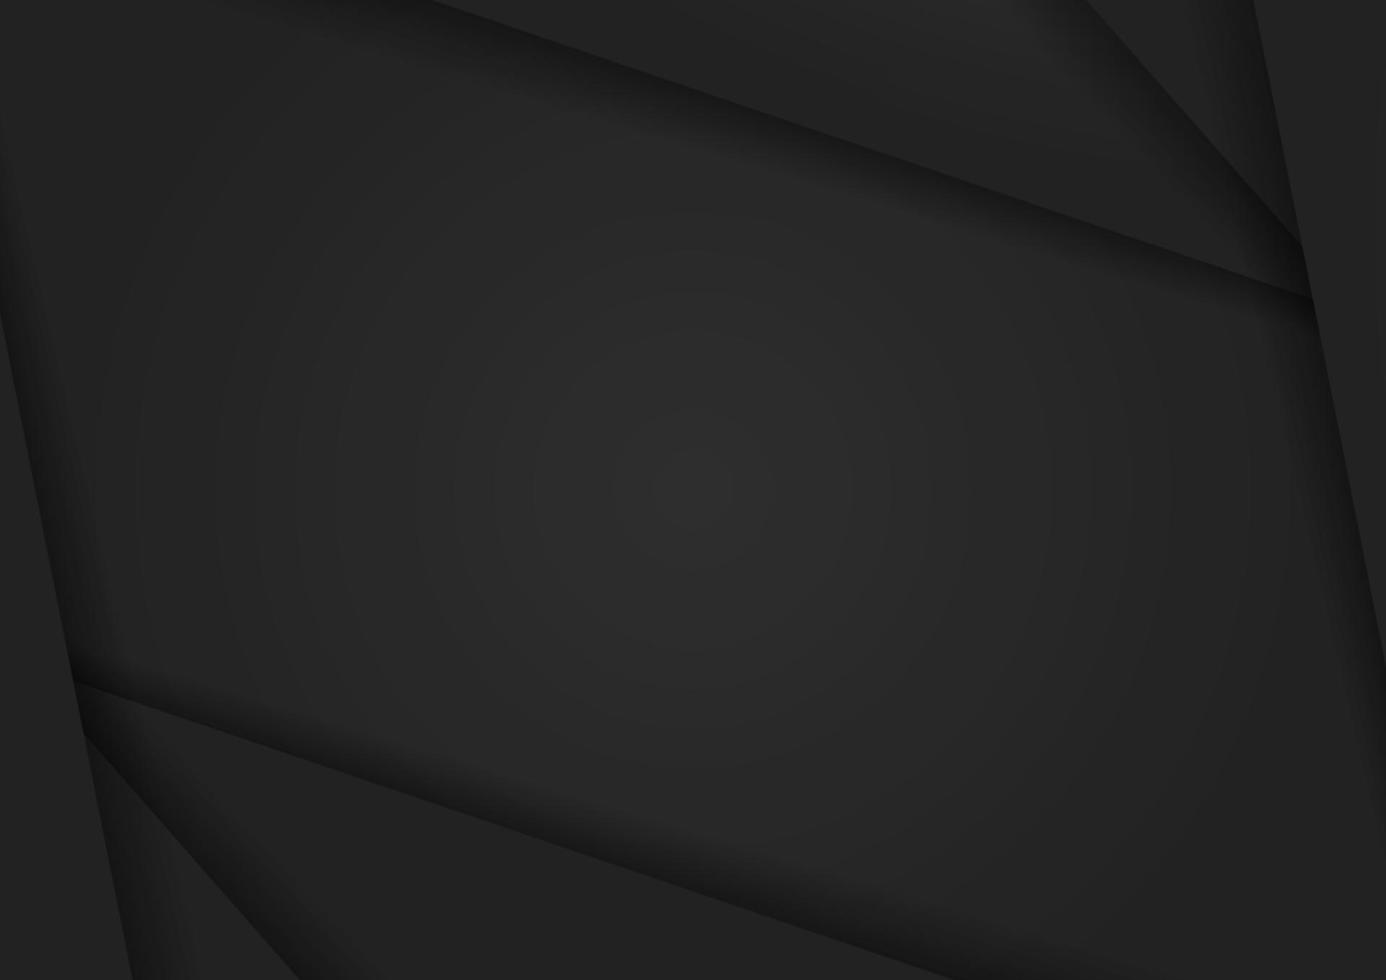 Abstract black paper background design with shadow vector